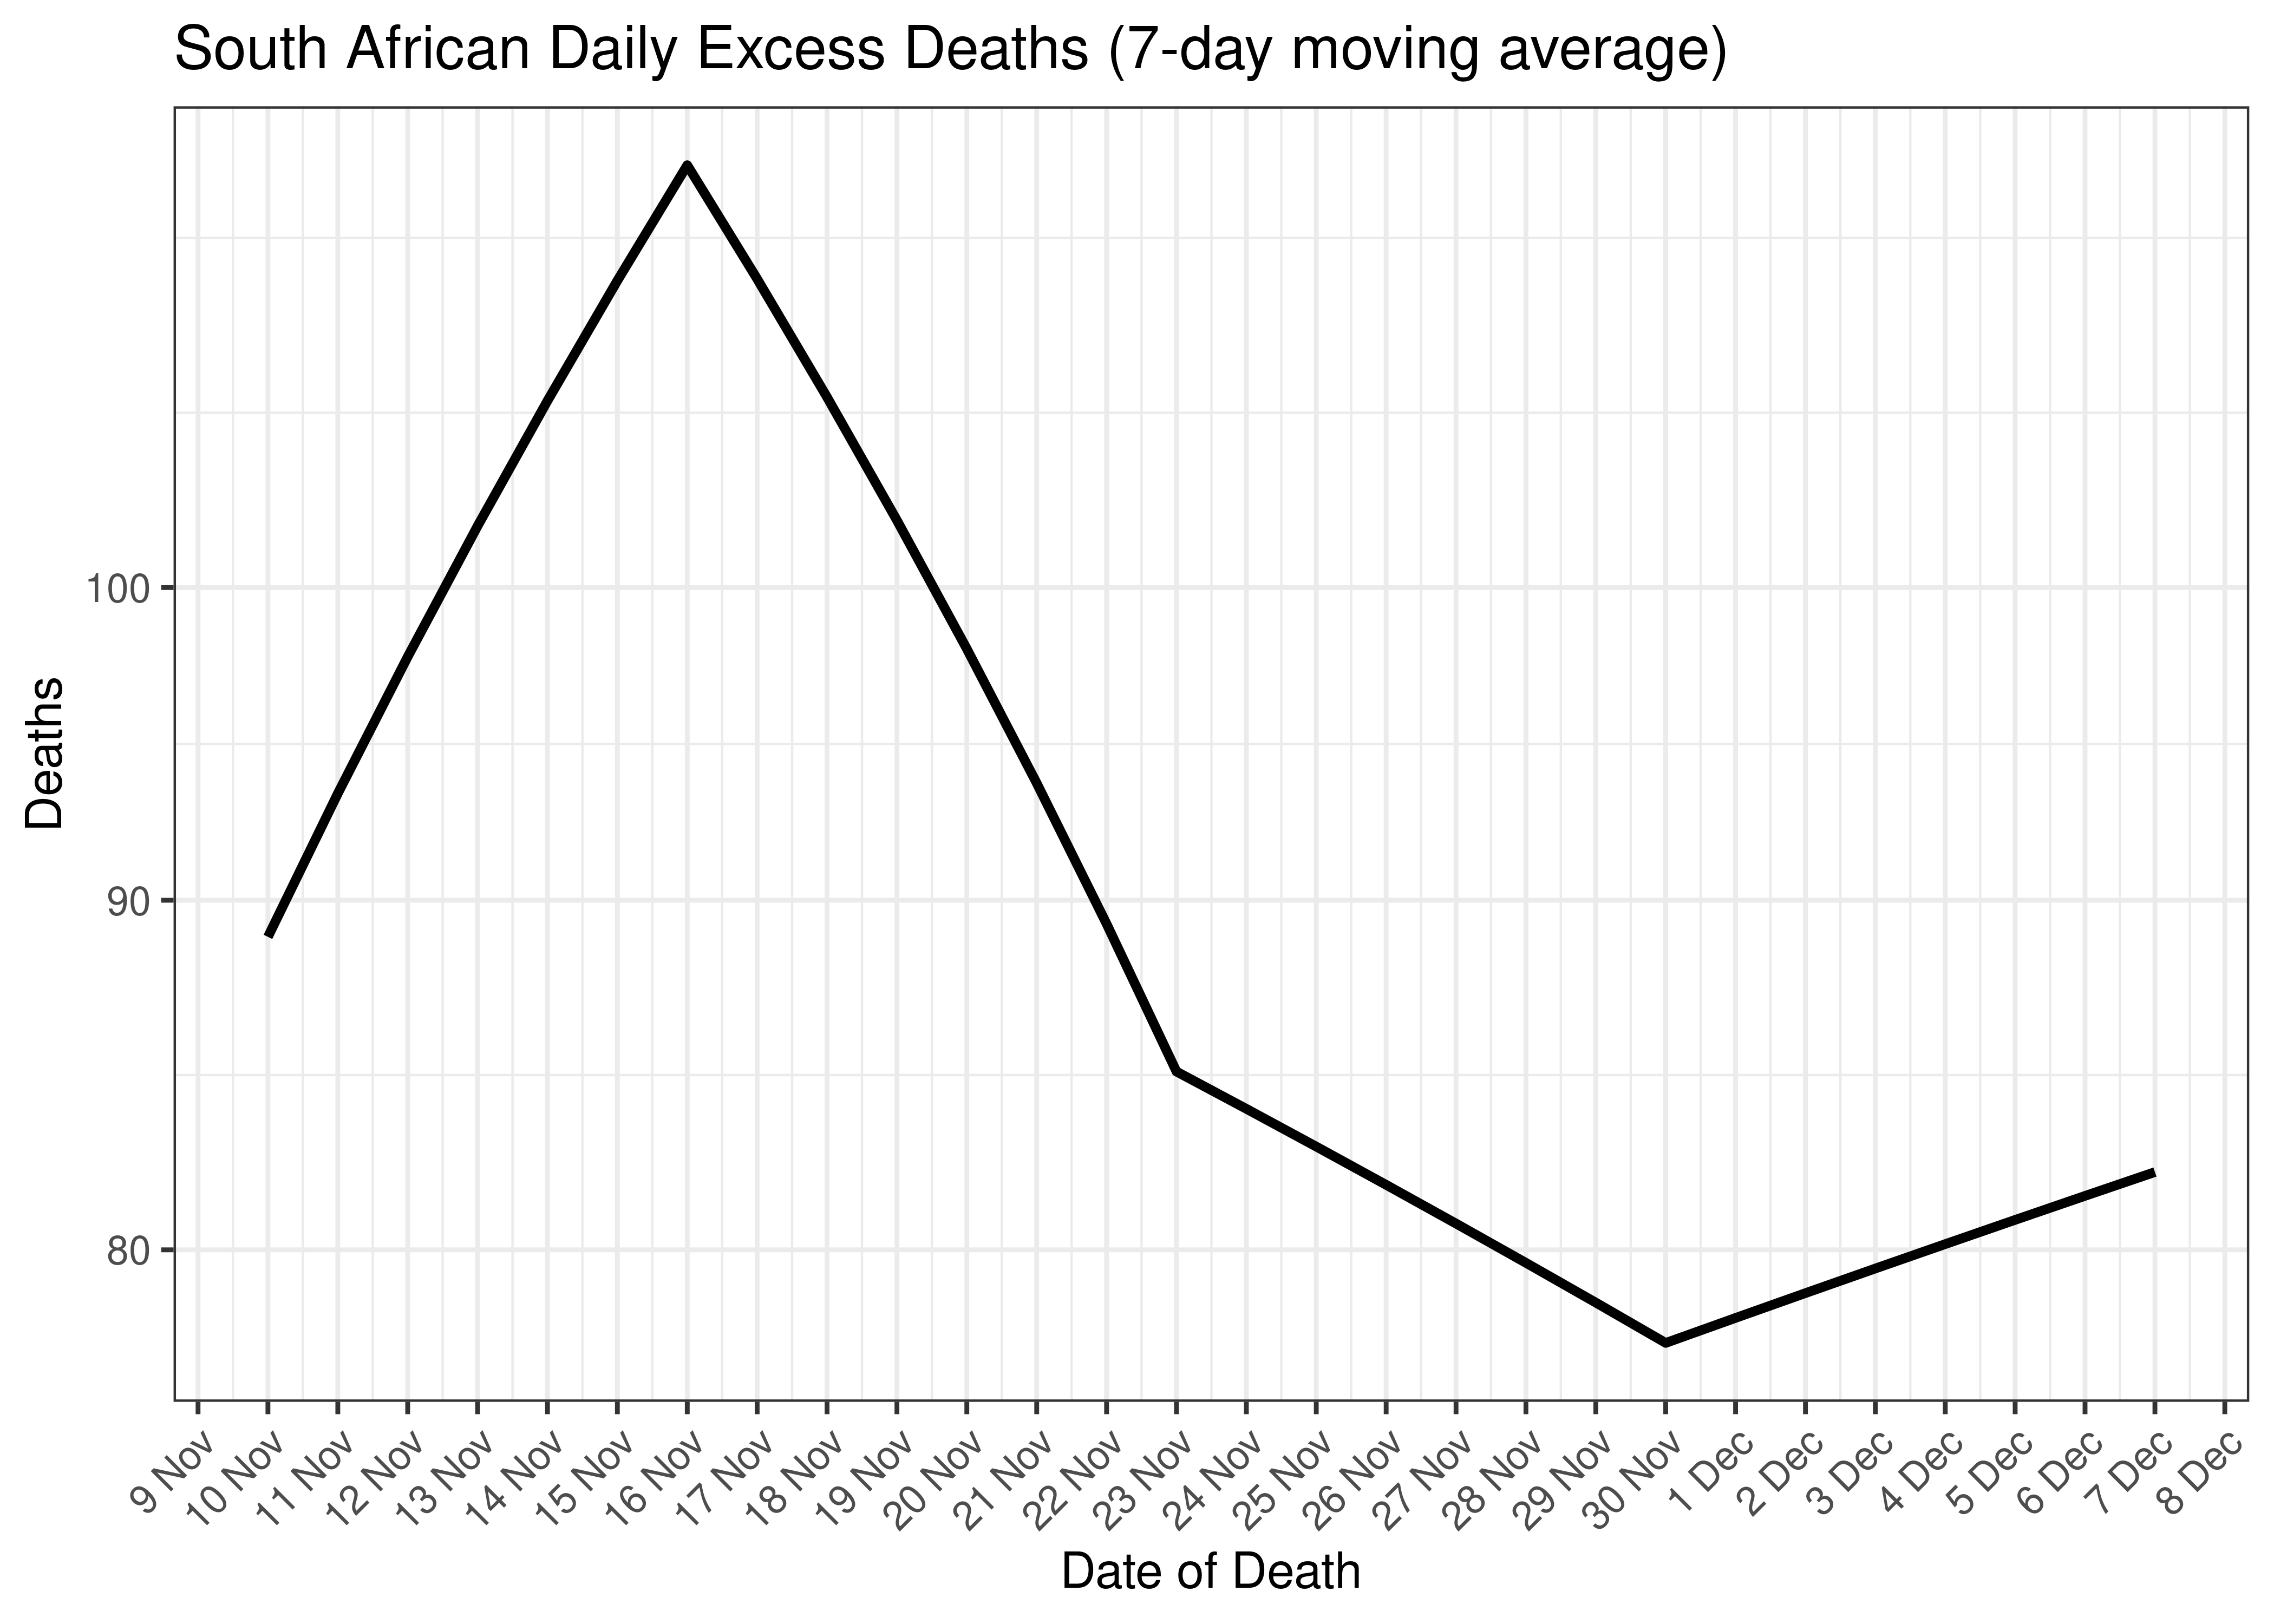 South African Daily Excess Deaths for Last 30-days (7-day moving average)